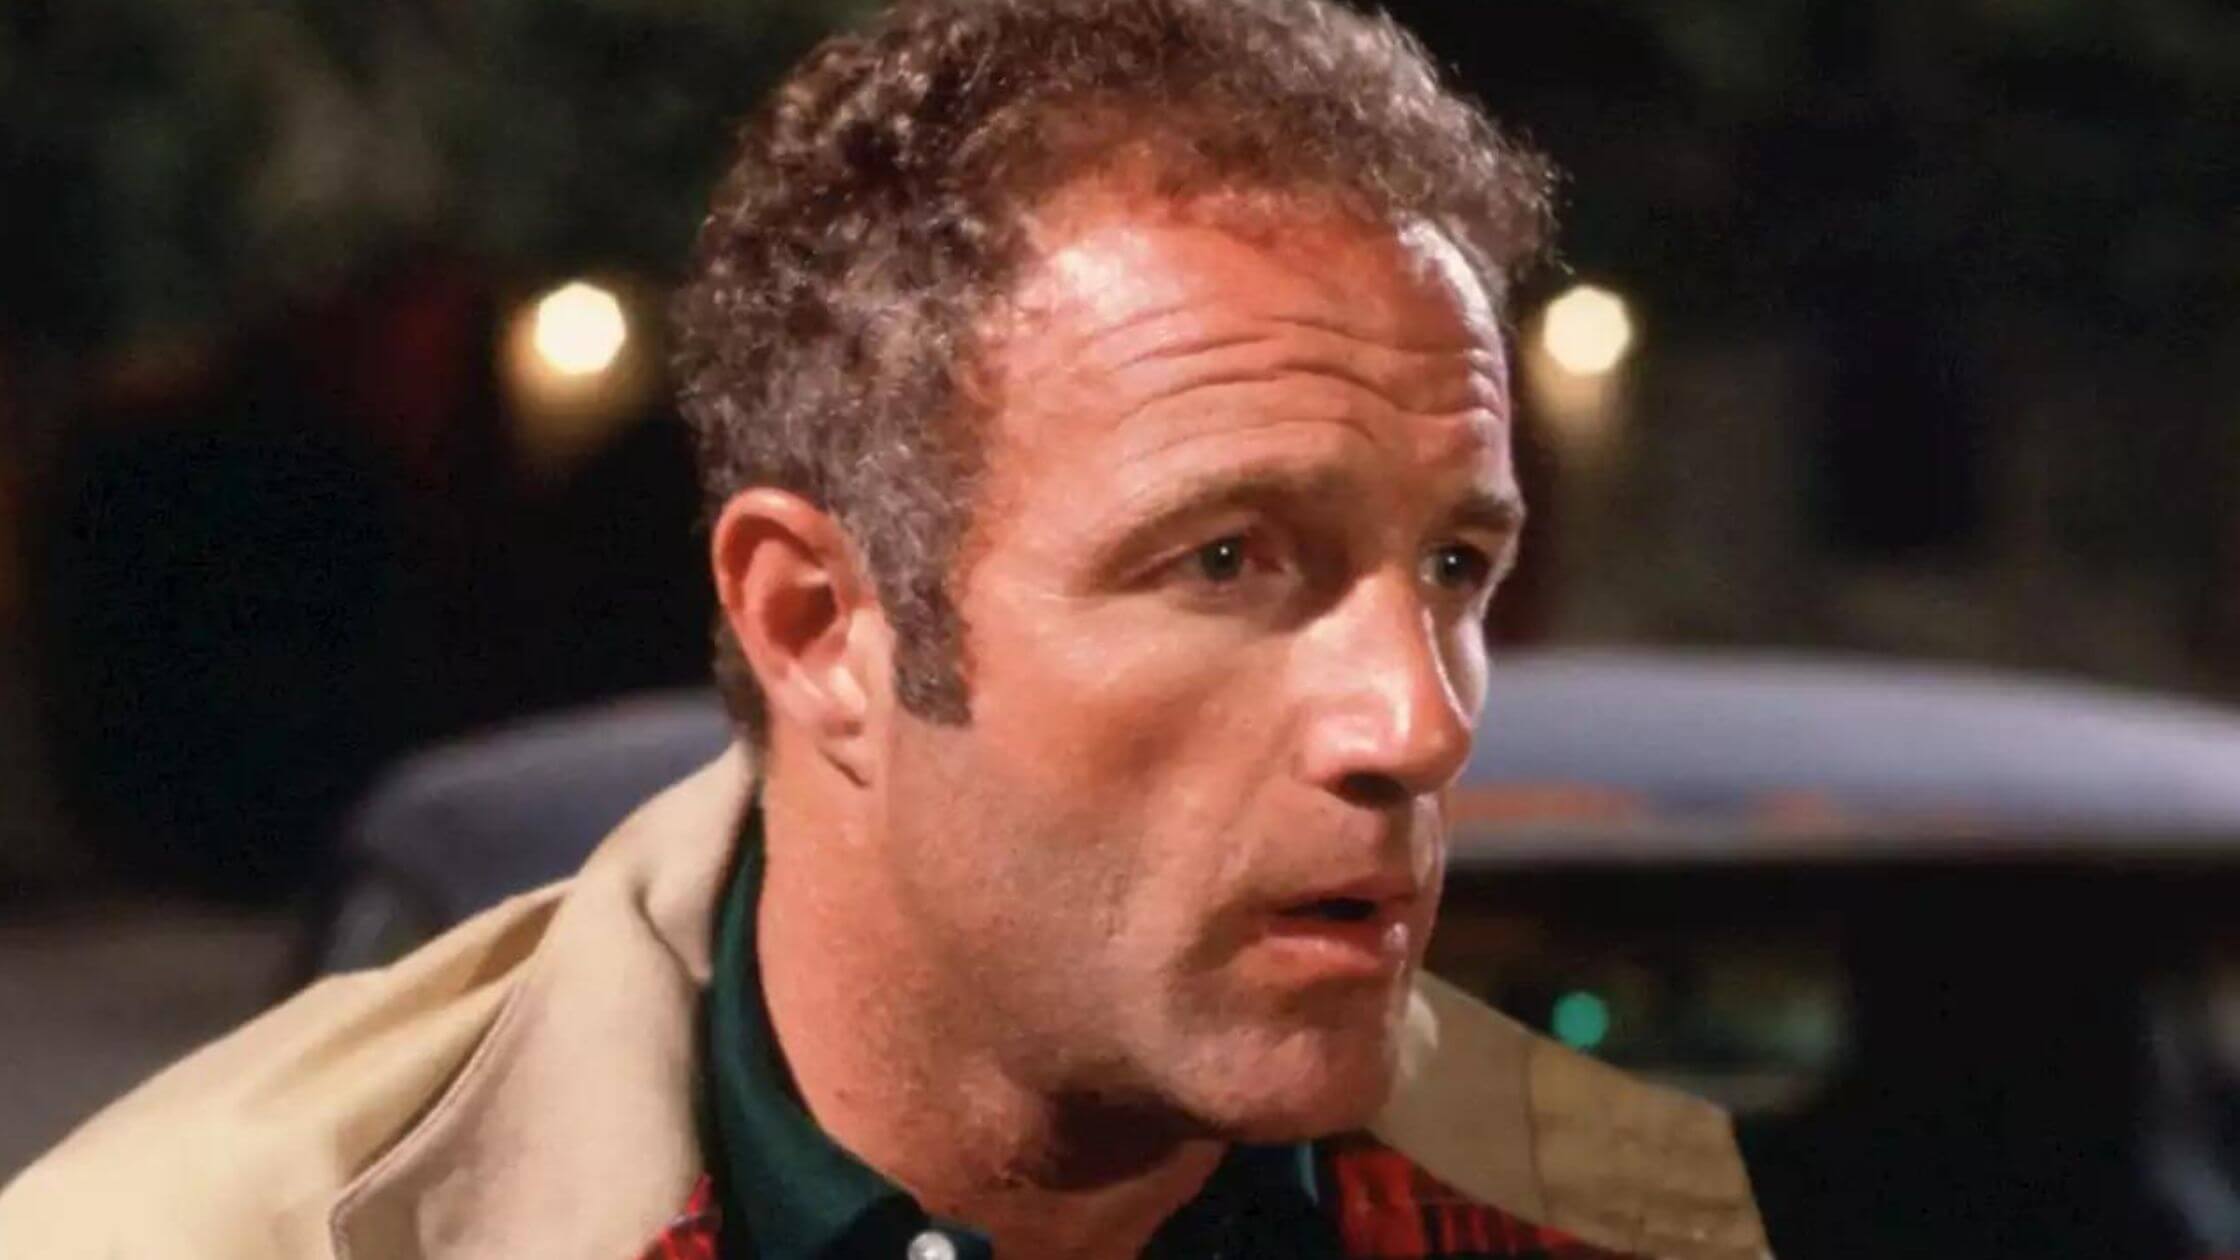 James Caan, An Onscreen Tough Guy, And Movie Craftsman Died At 82